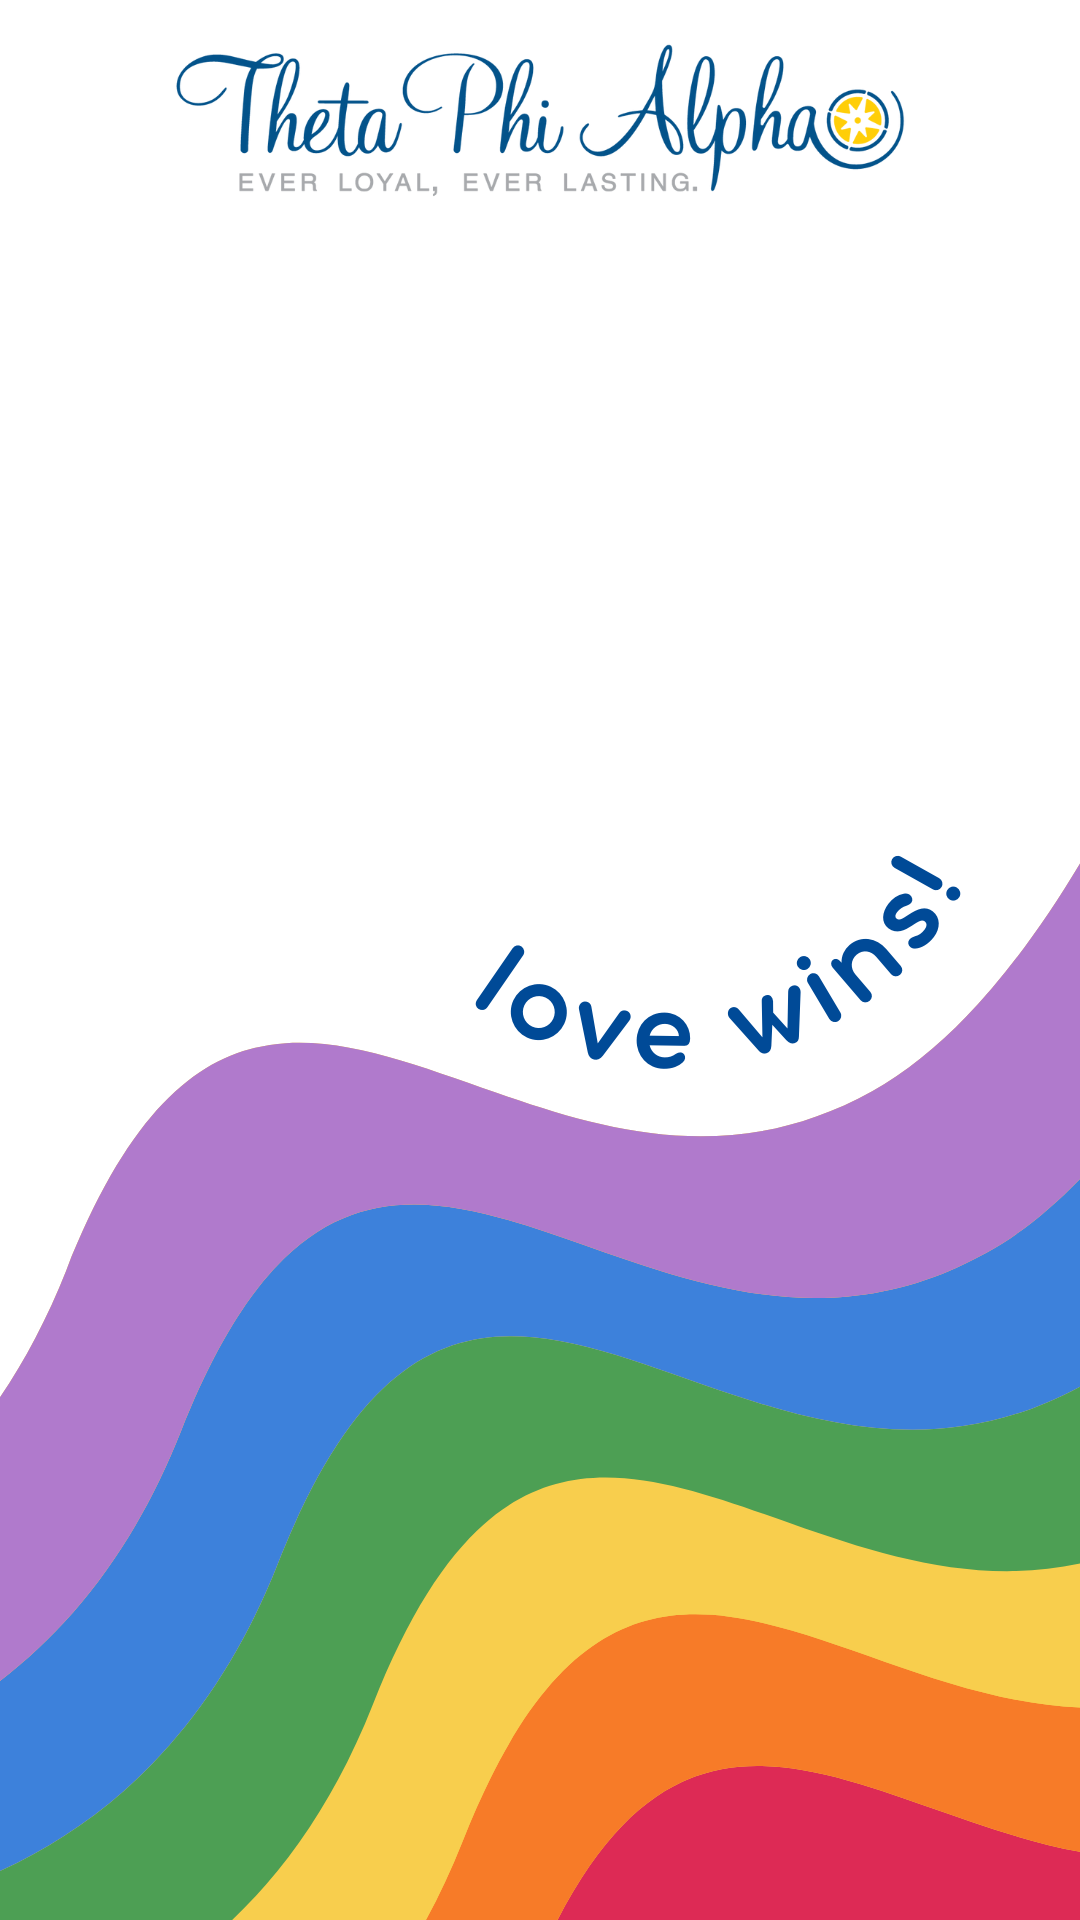 Image contains a white background with the Theta Phi Alpha logo at the top, the words "Love wins!", and a rainbow at the bottom.